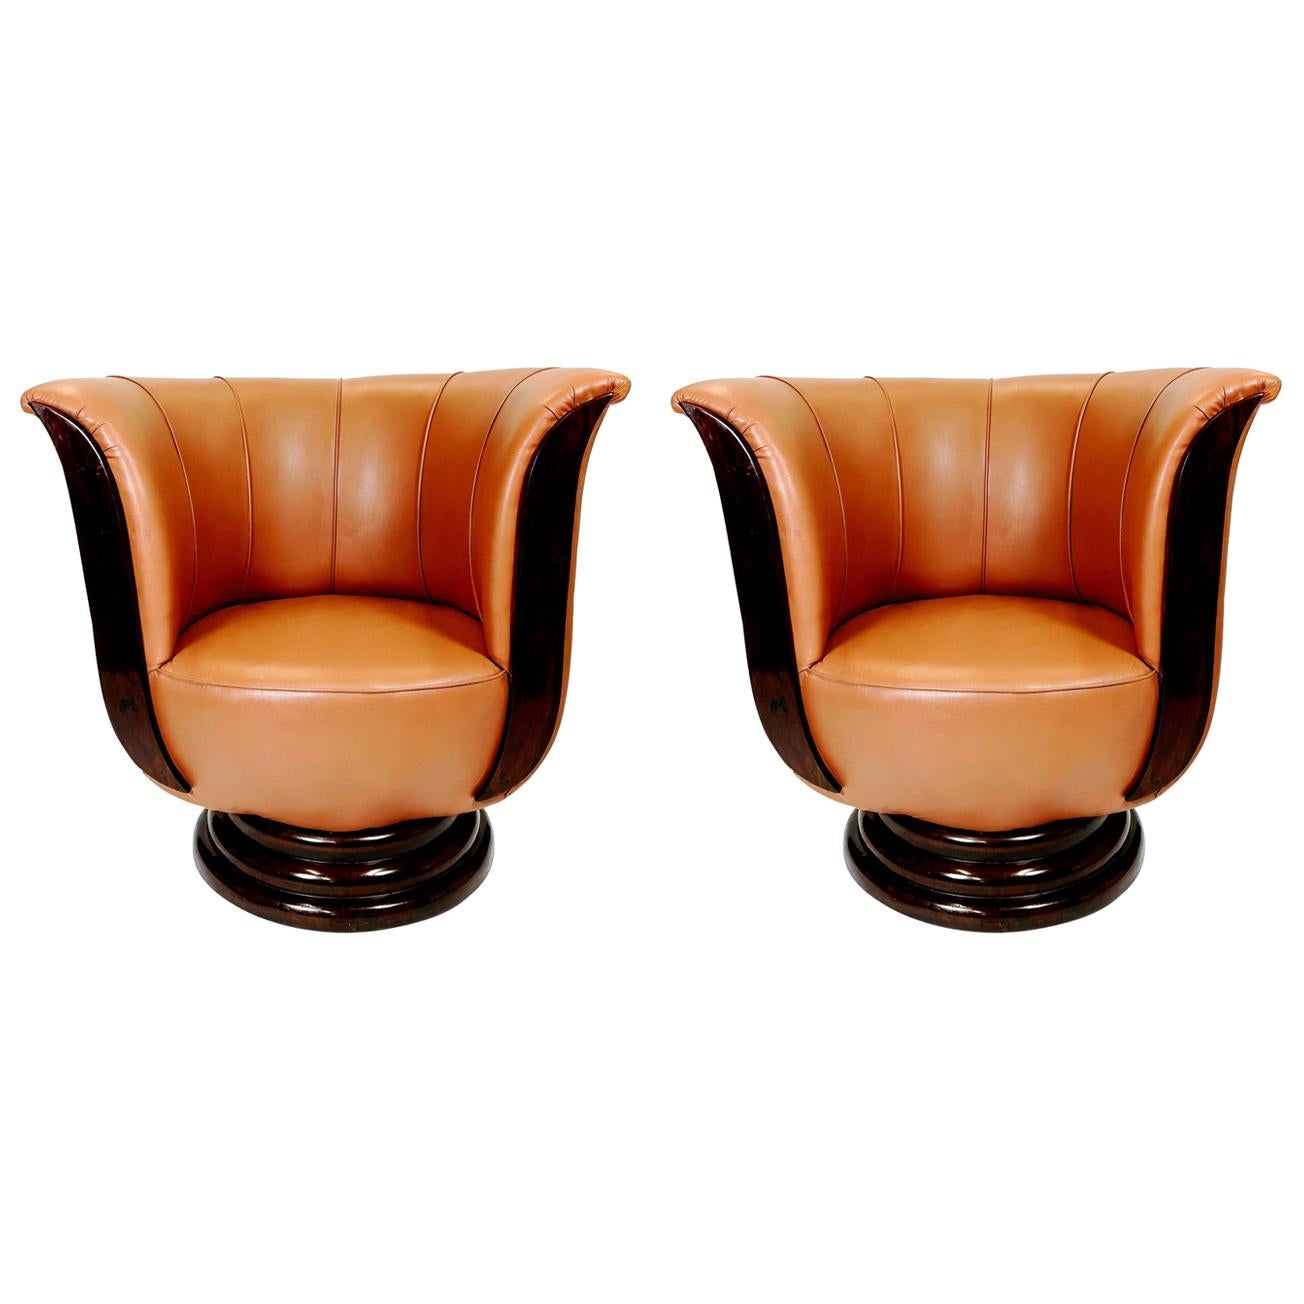 Art Deco Lotus Shape Leatherette Armchair Pair from the 1930s